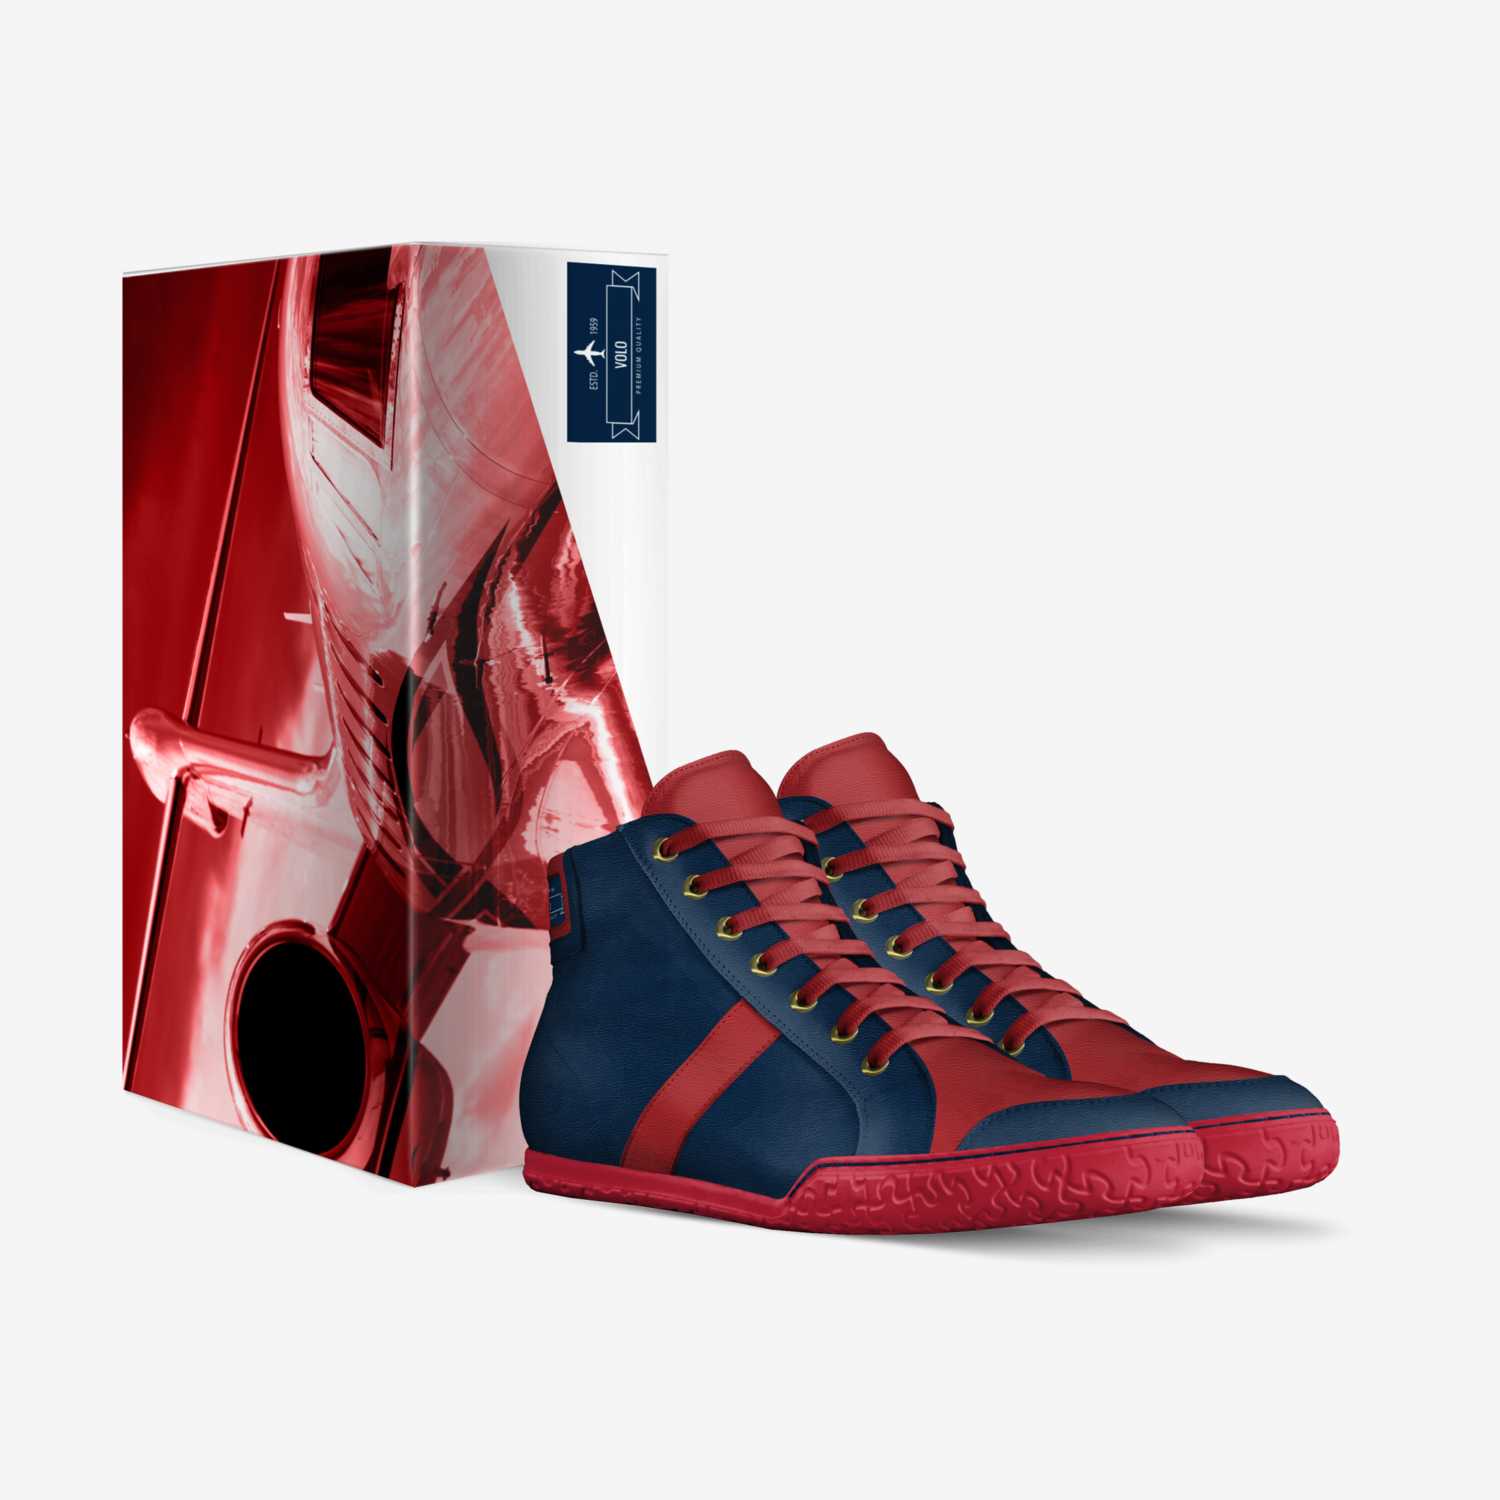 Volo custom made in Italy shoes by Dandre Taylor | Box view